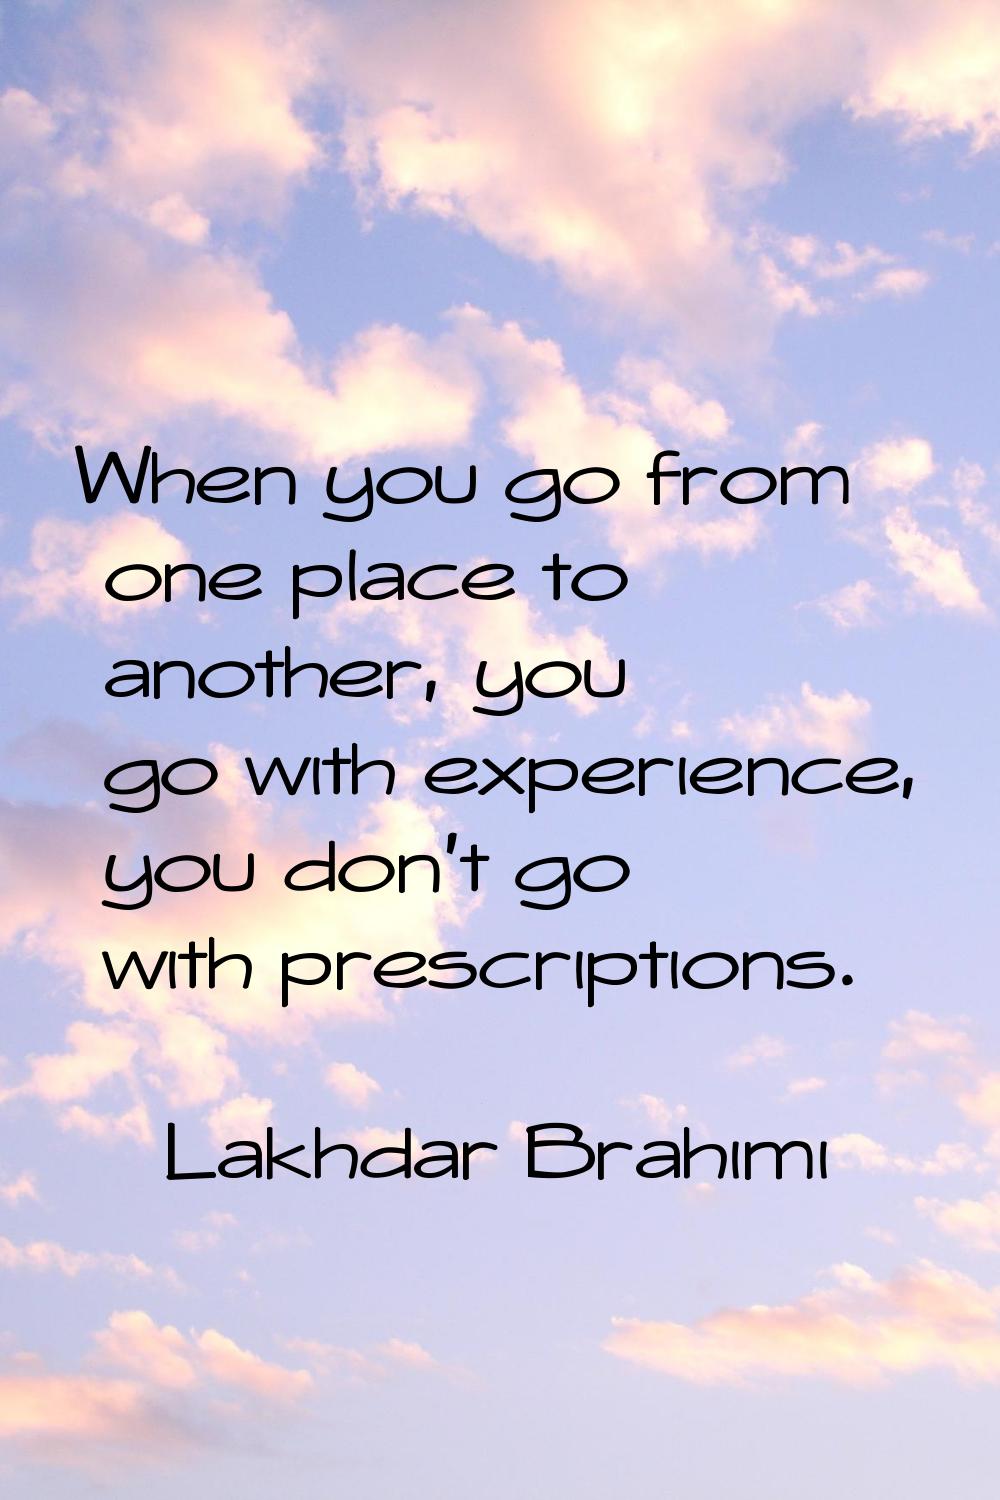 When you go from one place to another, you go with experience, you don't go with prescriptions.